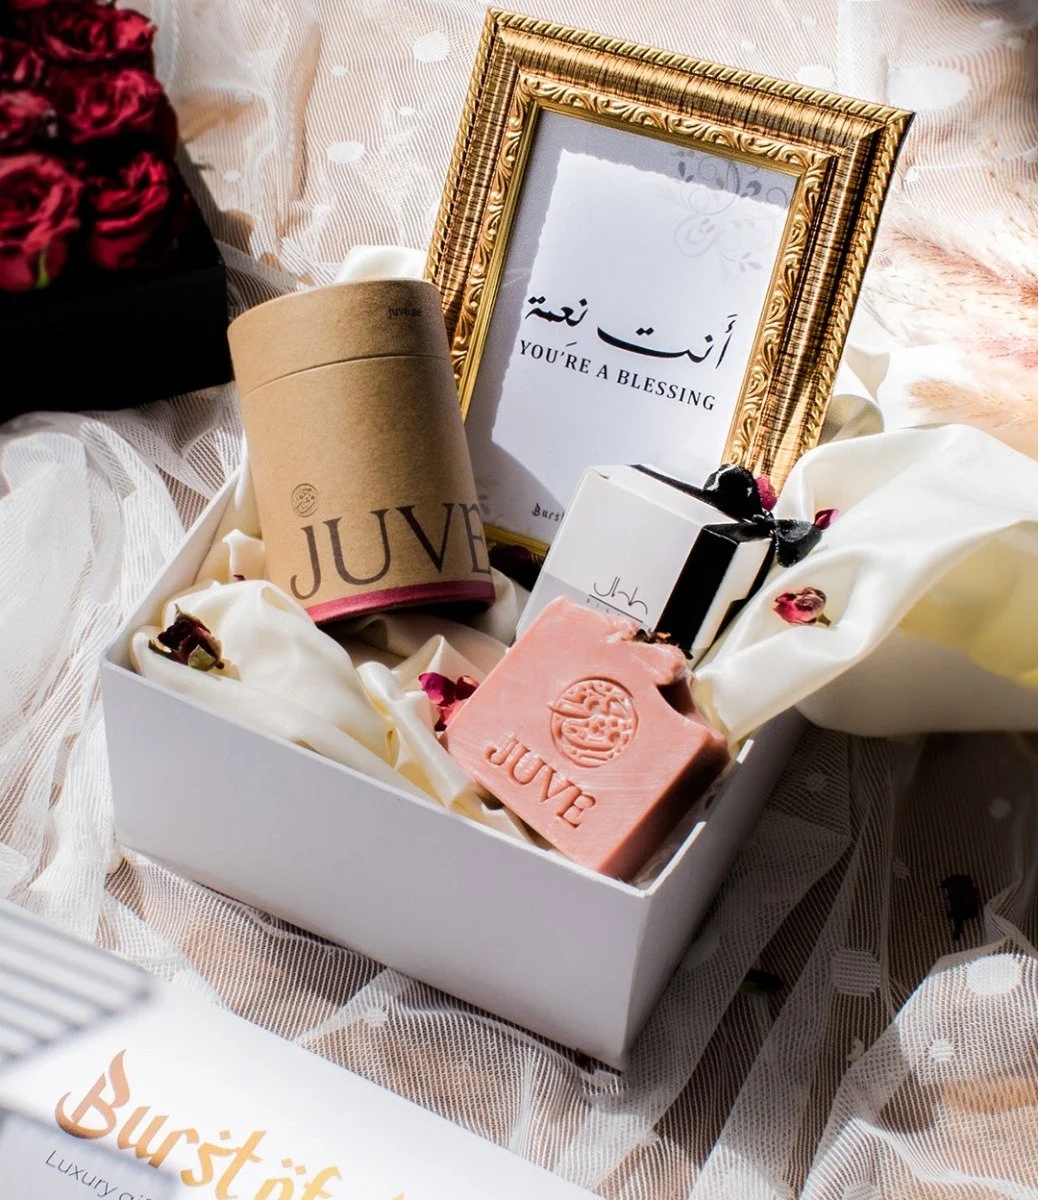 Touch of Rose Gift Hamper For Her by Burst of Arabia